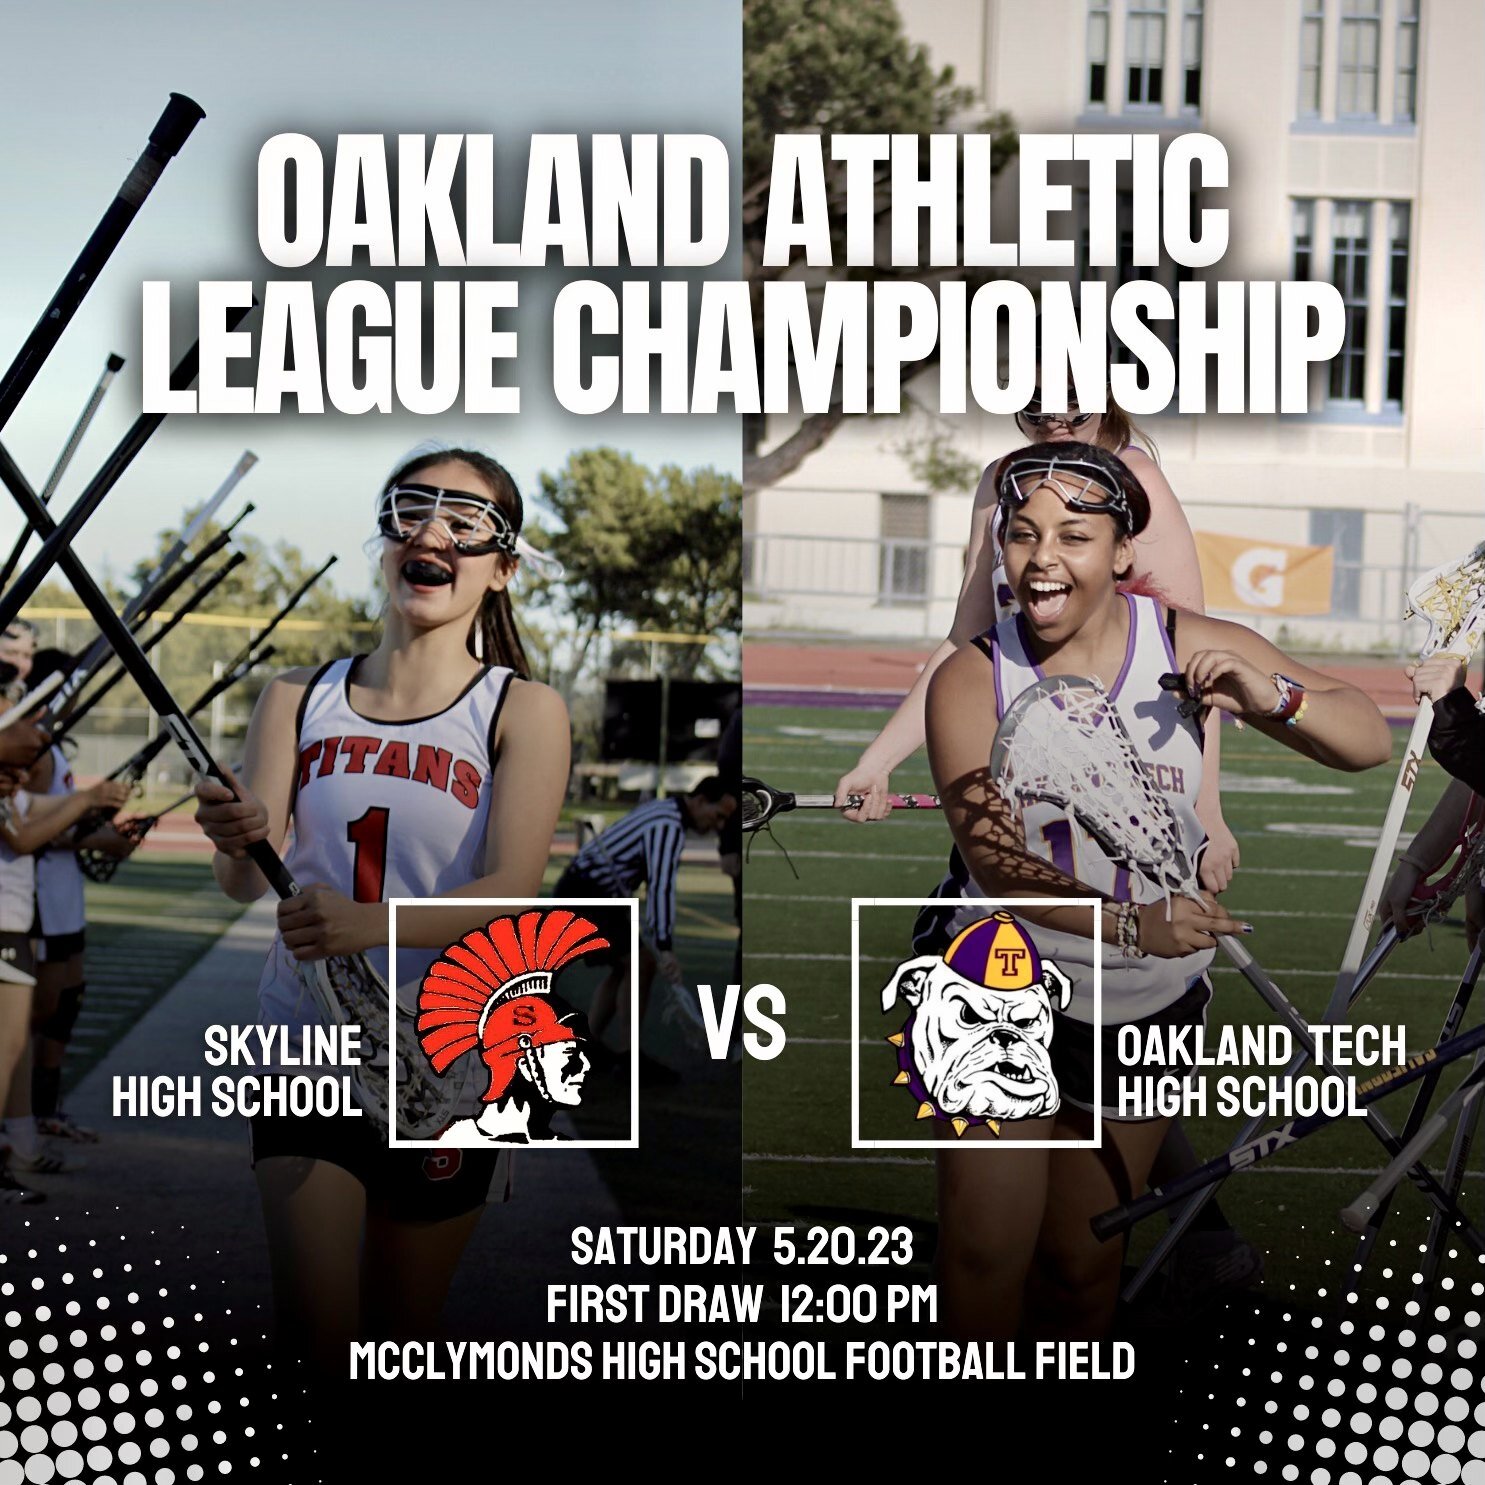 Families, friends, lacrosse lovers, and Oakland supporters&mdash;come join us this Saturday for the first-ever Oakland Athletic League Lacrosse Championship Game! Skyline and Oakland Tech will face off to see who takes home the title. It is sure to b